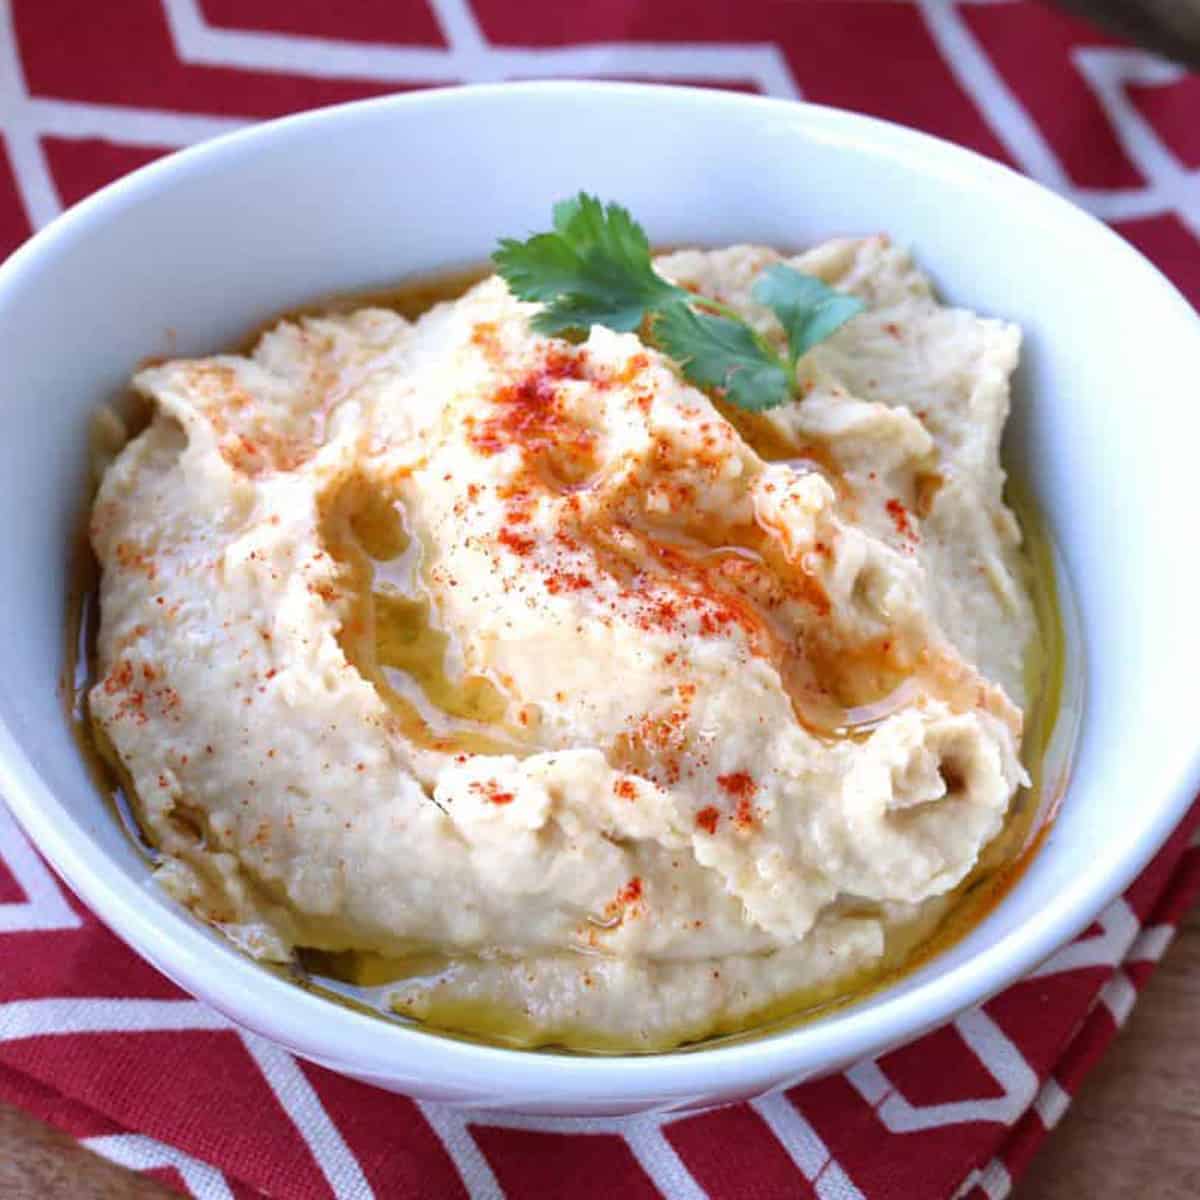 hummus recipe best homemade from scratch creamy tahini olive oil paprika